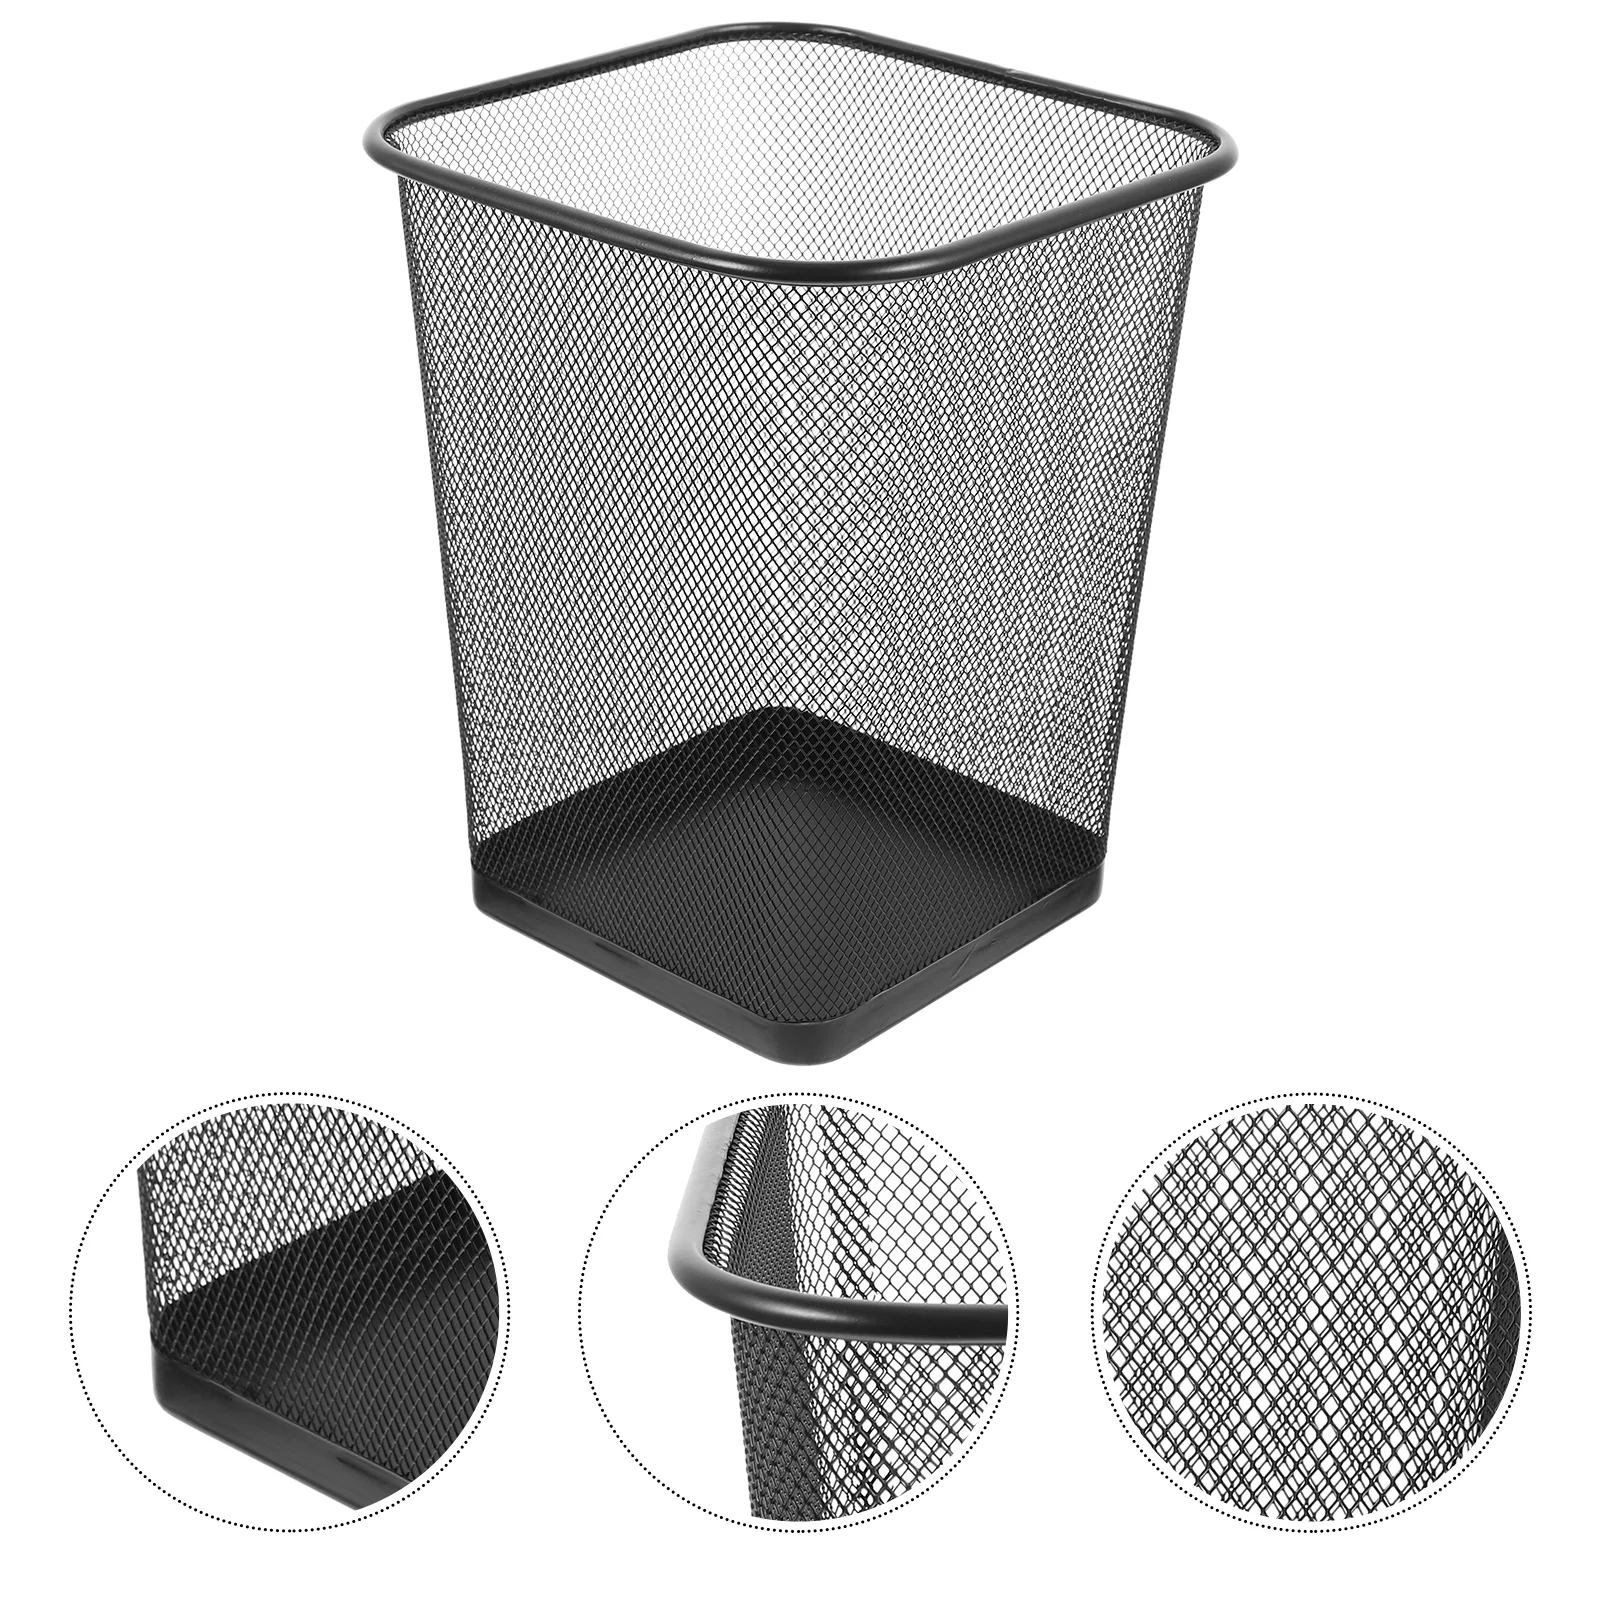 

Trash Can Garbage Bin Mesh Waste Basket Container Wire Metal Wastebasket Office Paper Kitchen Recycling Bedroom Black Rubbish